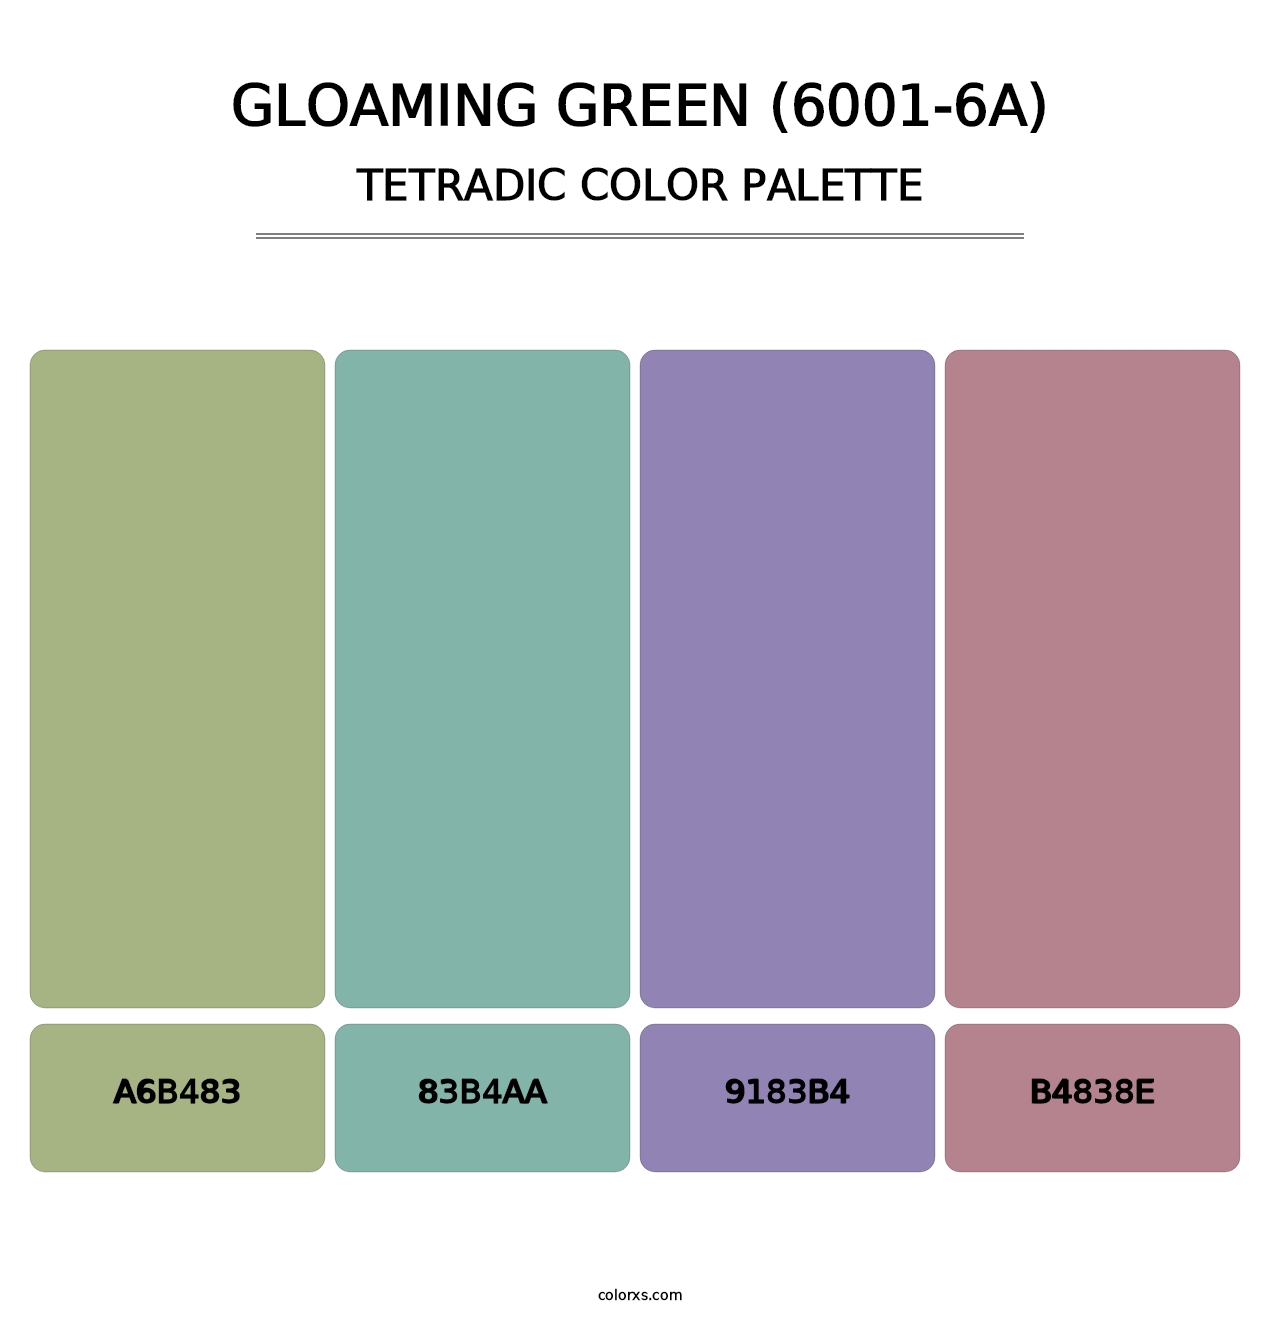 Gloaming Green (6001-6A) - Tetradic Color Palette